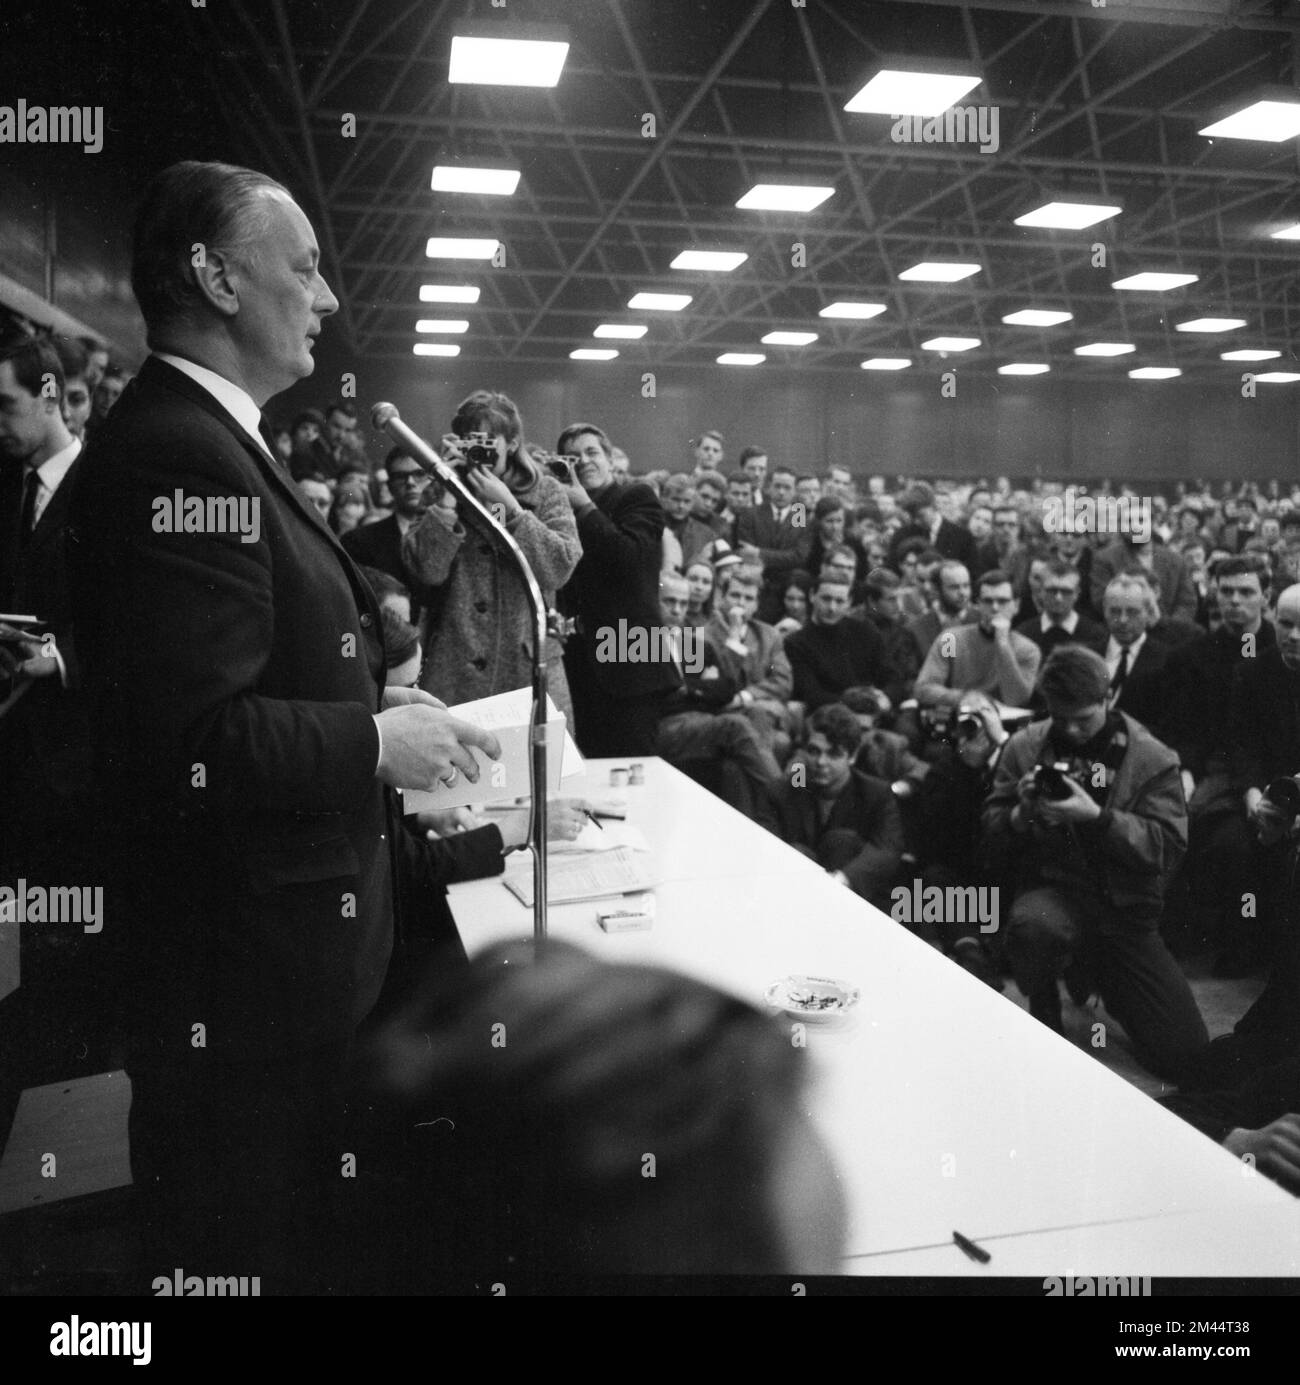 The election campaign of the right-wing radical NPD, here in the Ruhr area in 1965 with its candidate Adolf von Thadden, did not bring the desired Stock Photo